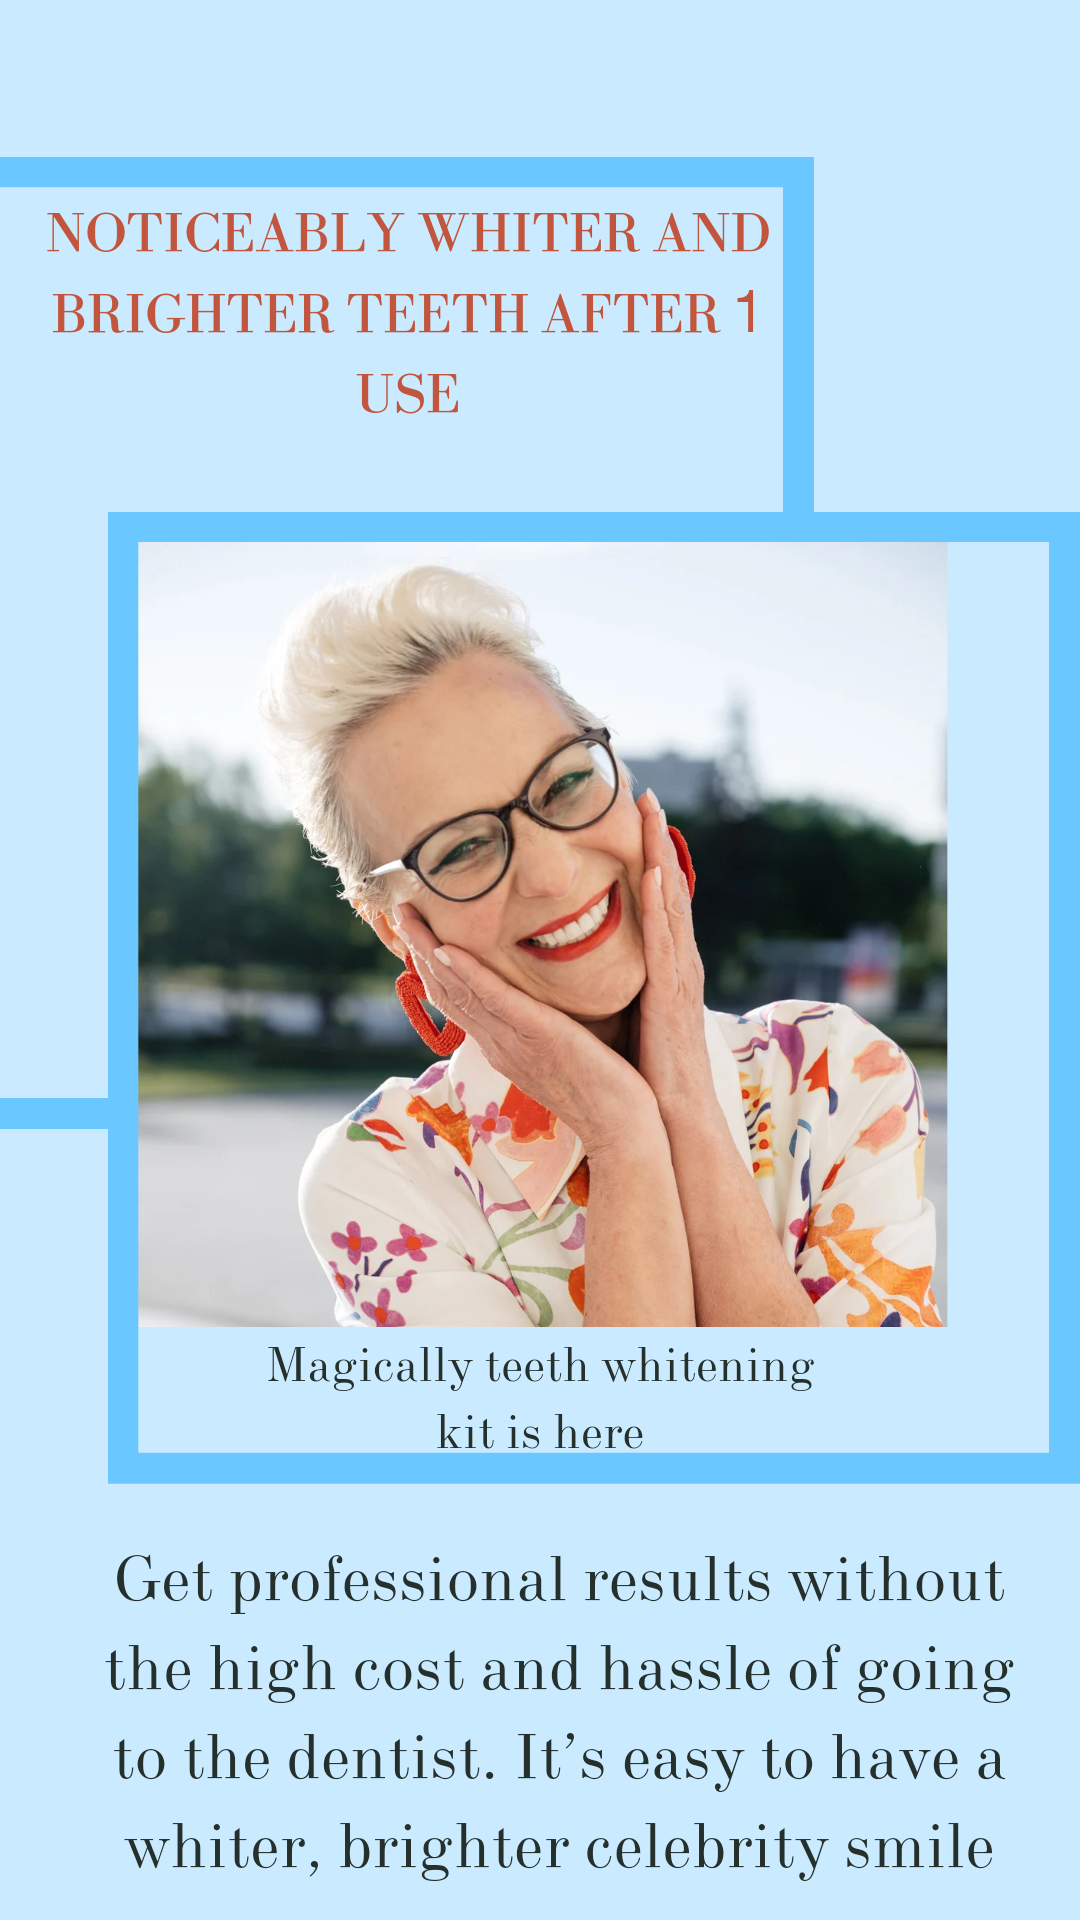 NOTICEABLY WHITER AND
BRIGHTER TEETH AFTER 1
USE

  

\) :
Magically teeth whitening

kit is here

Get professional results without
the high cost and hassle of going
to the dentist. It’s easy to have a
whiter, brighter celebrity smile